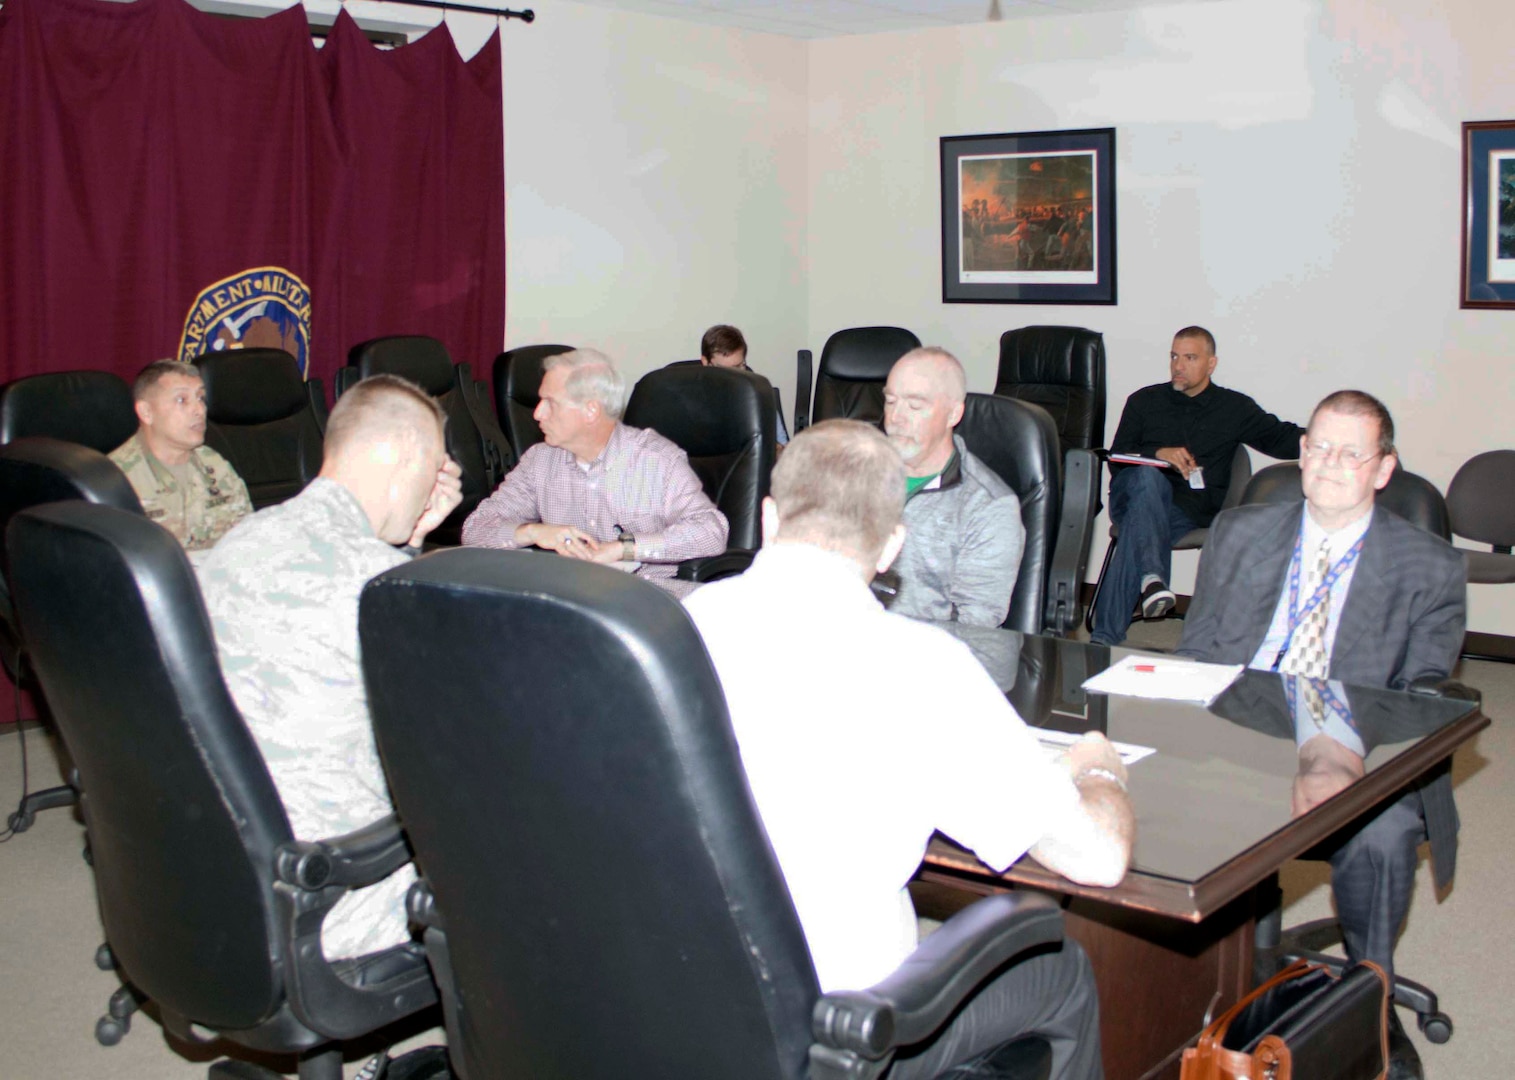 The highlight of this year’s COOPEX was a successful VTC, made possible by the J6 enterprise personnel working with the PA National Guard Joint Force Headquarters J6.